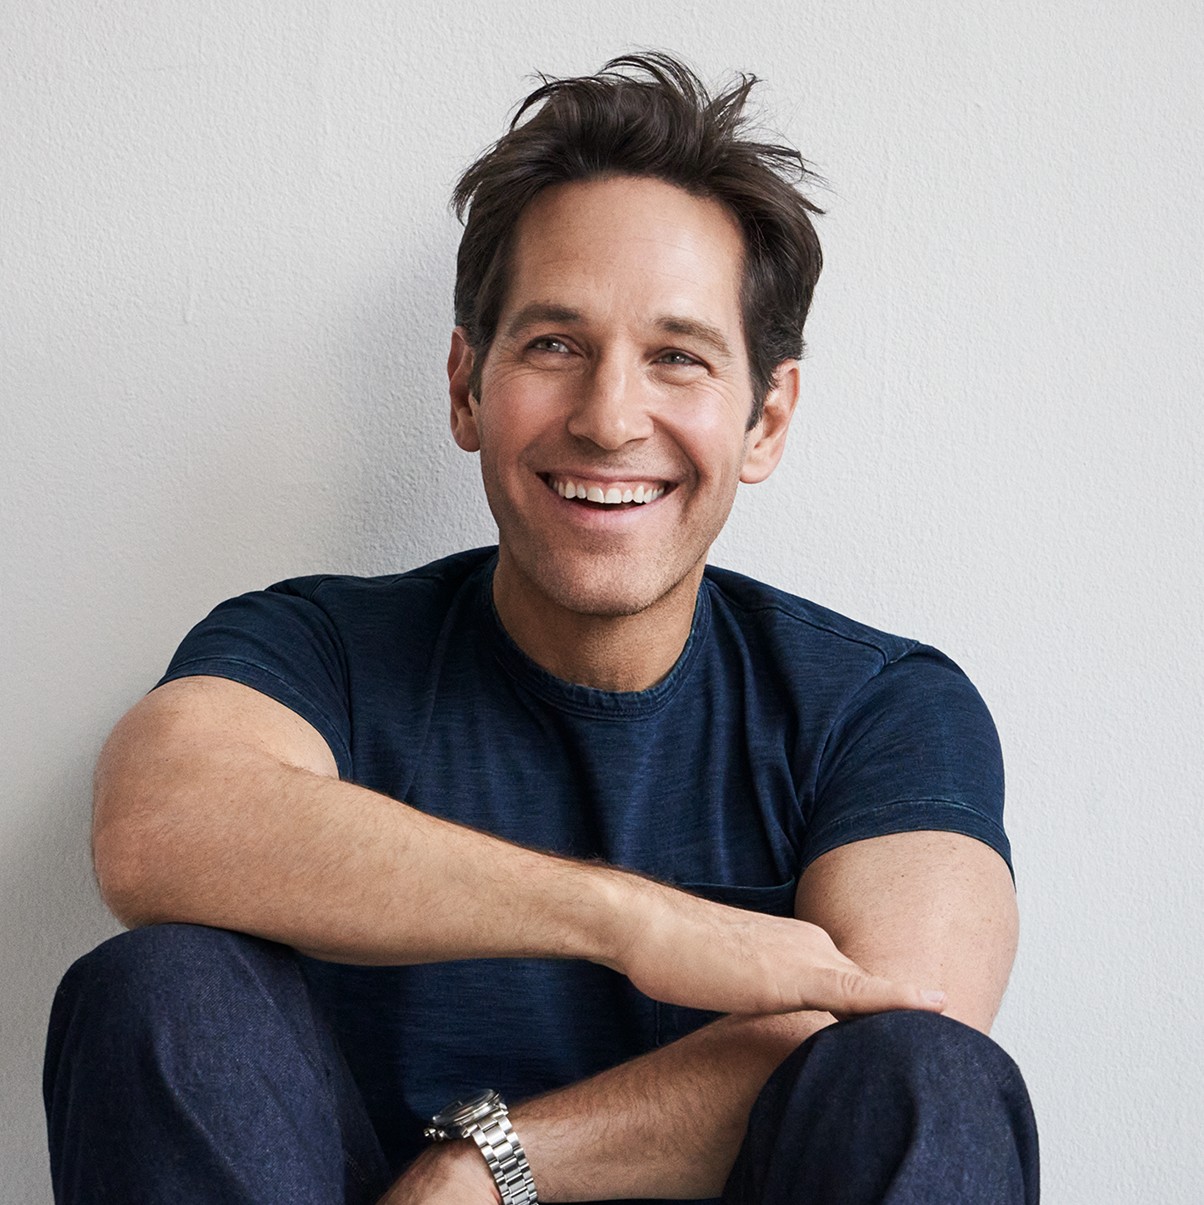 Paul Rudd's Real Superpower